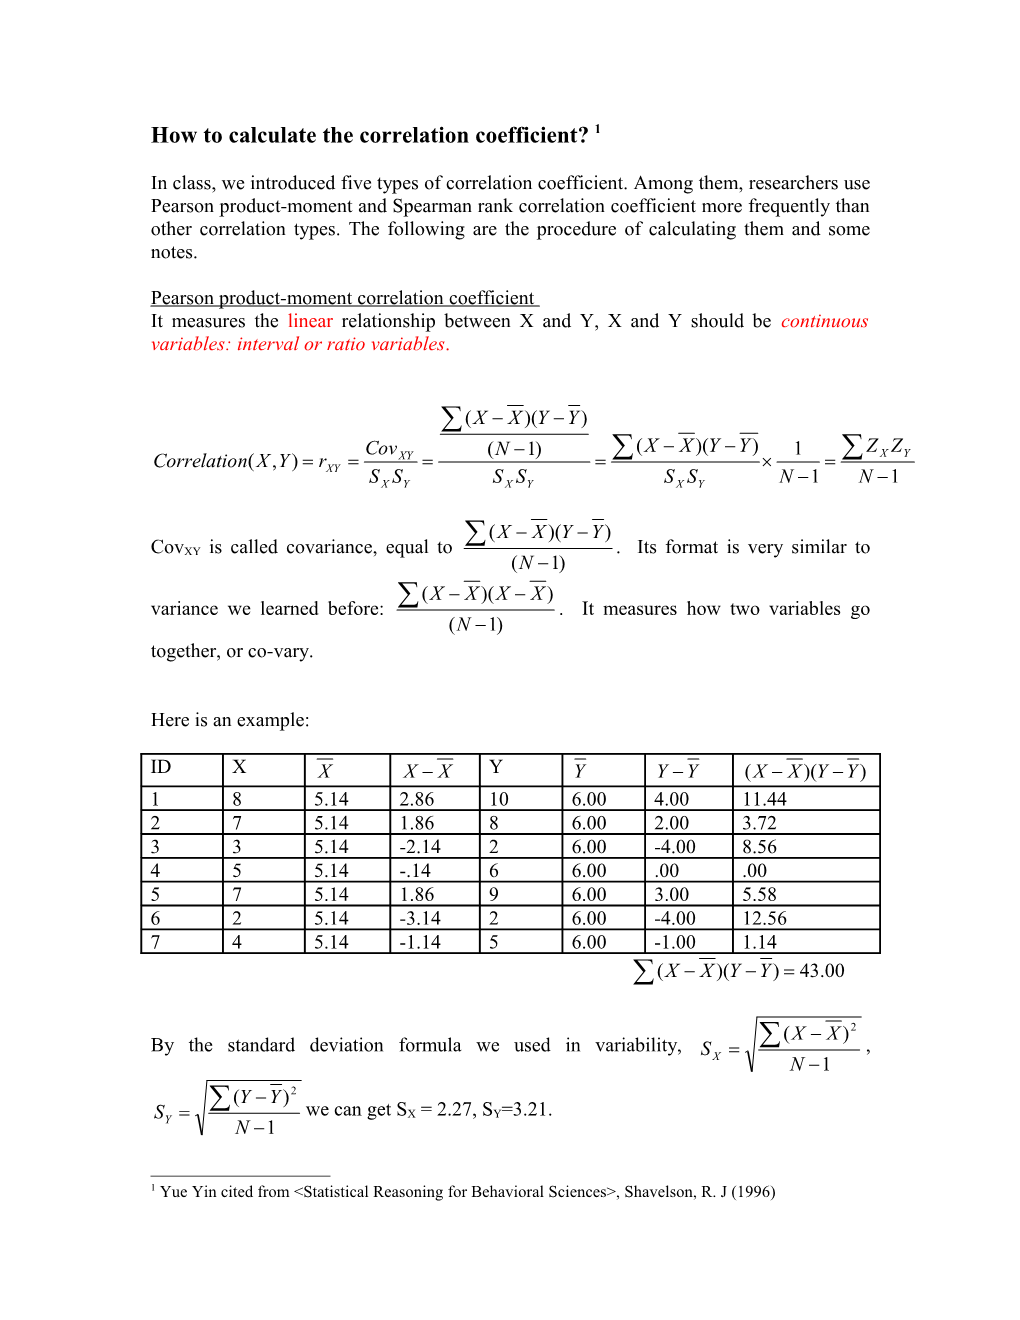 How to Calculate the Correlation Coefficient? 1